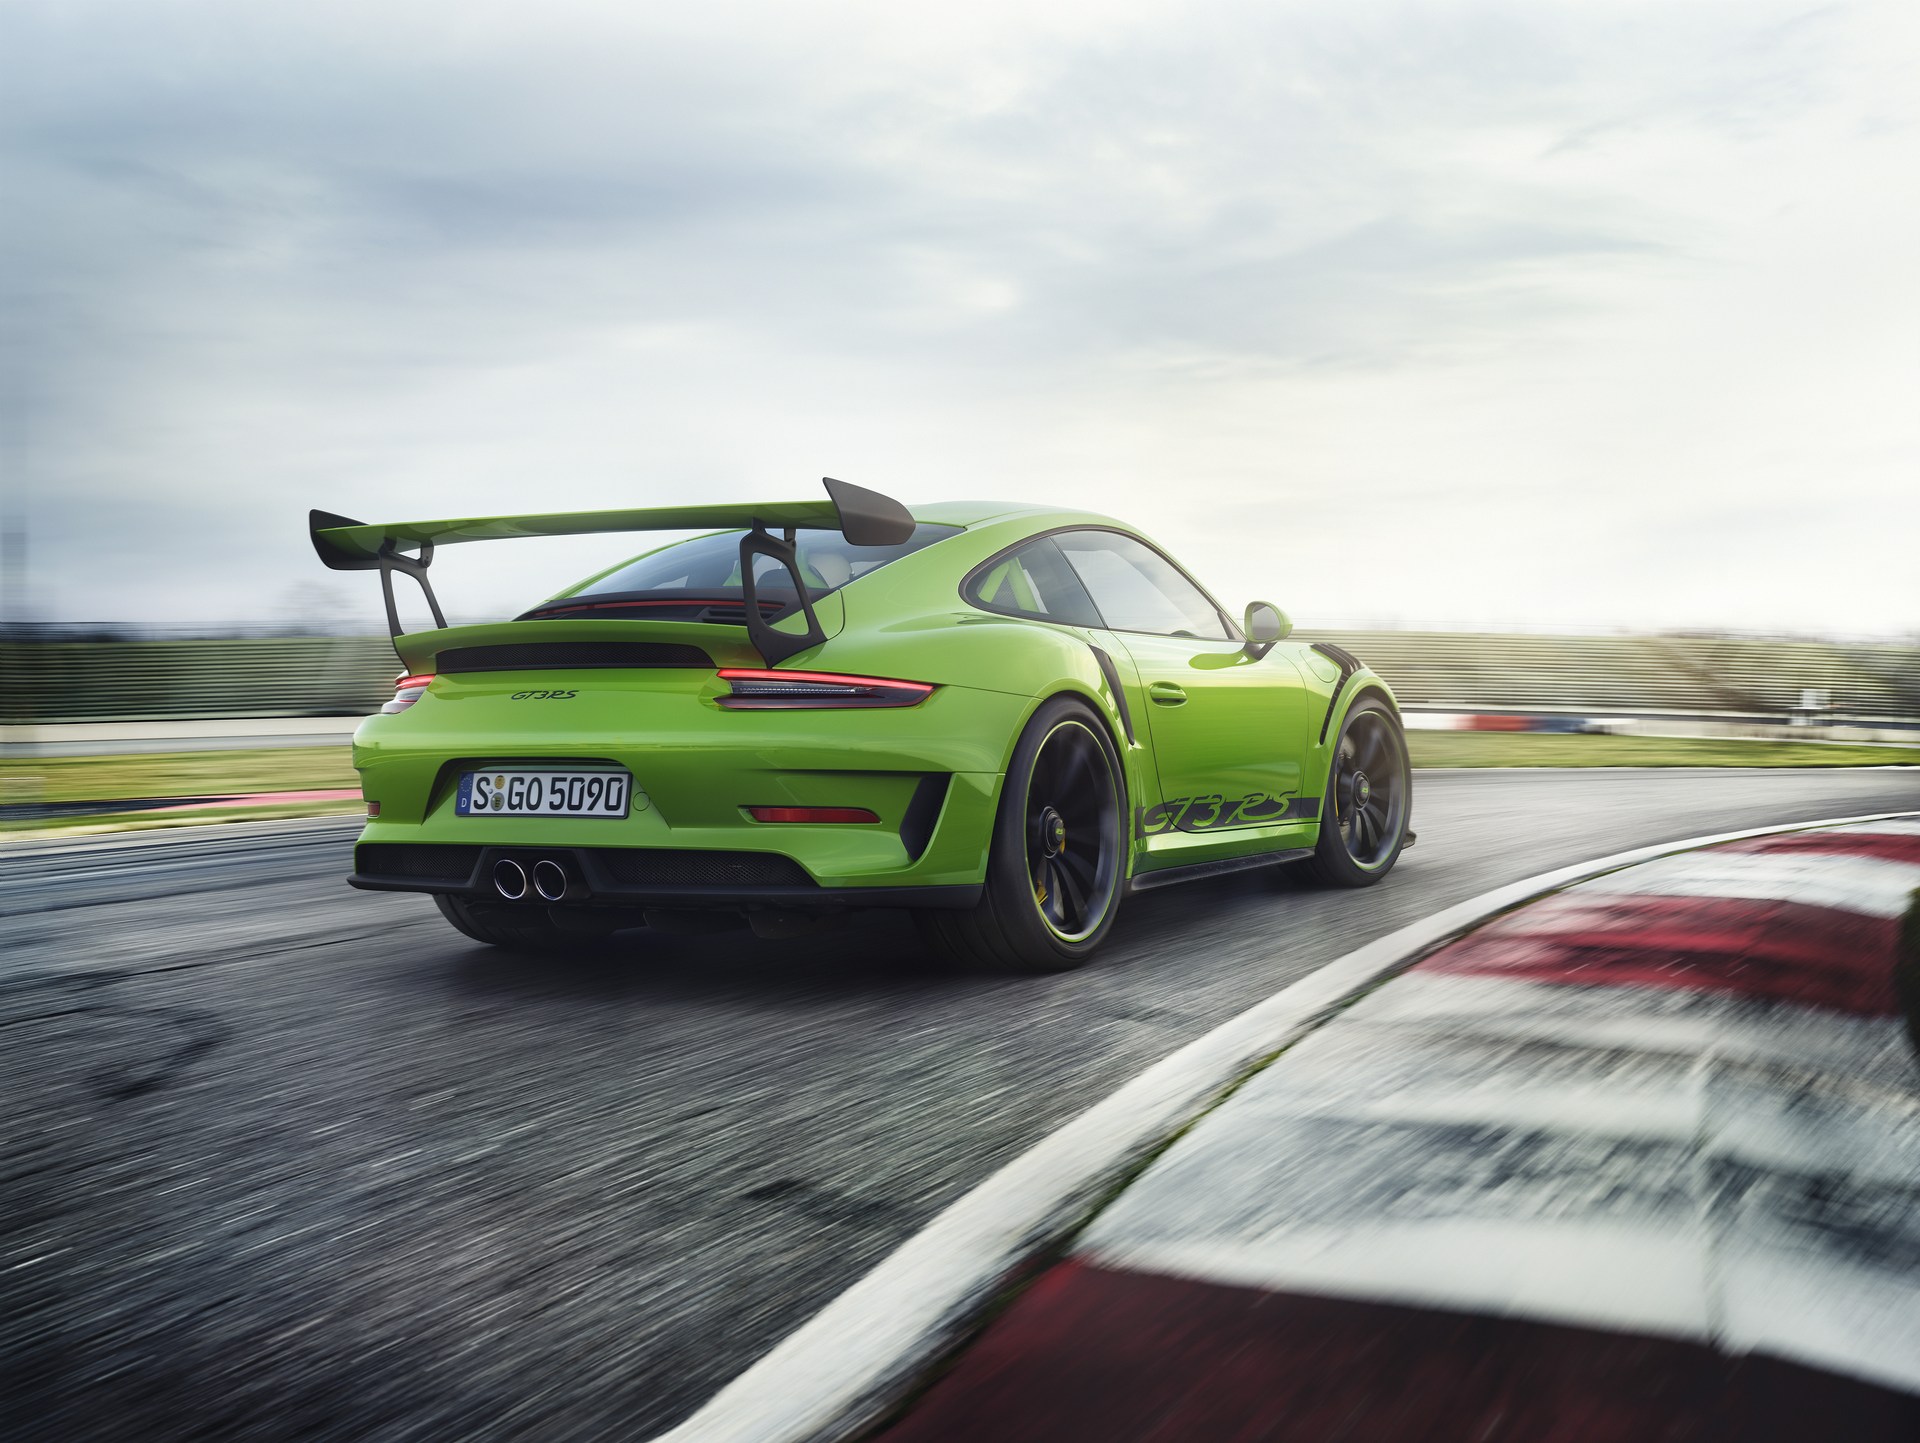 2019 Porsche 911 Gt3 Rs Gets Weissach Package Sub 7 Nurburgring Lap